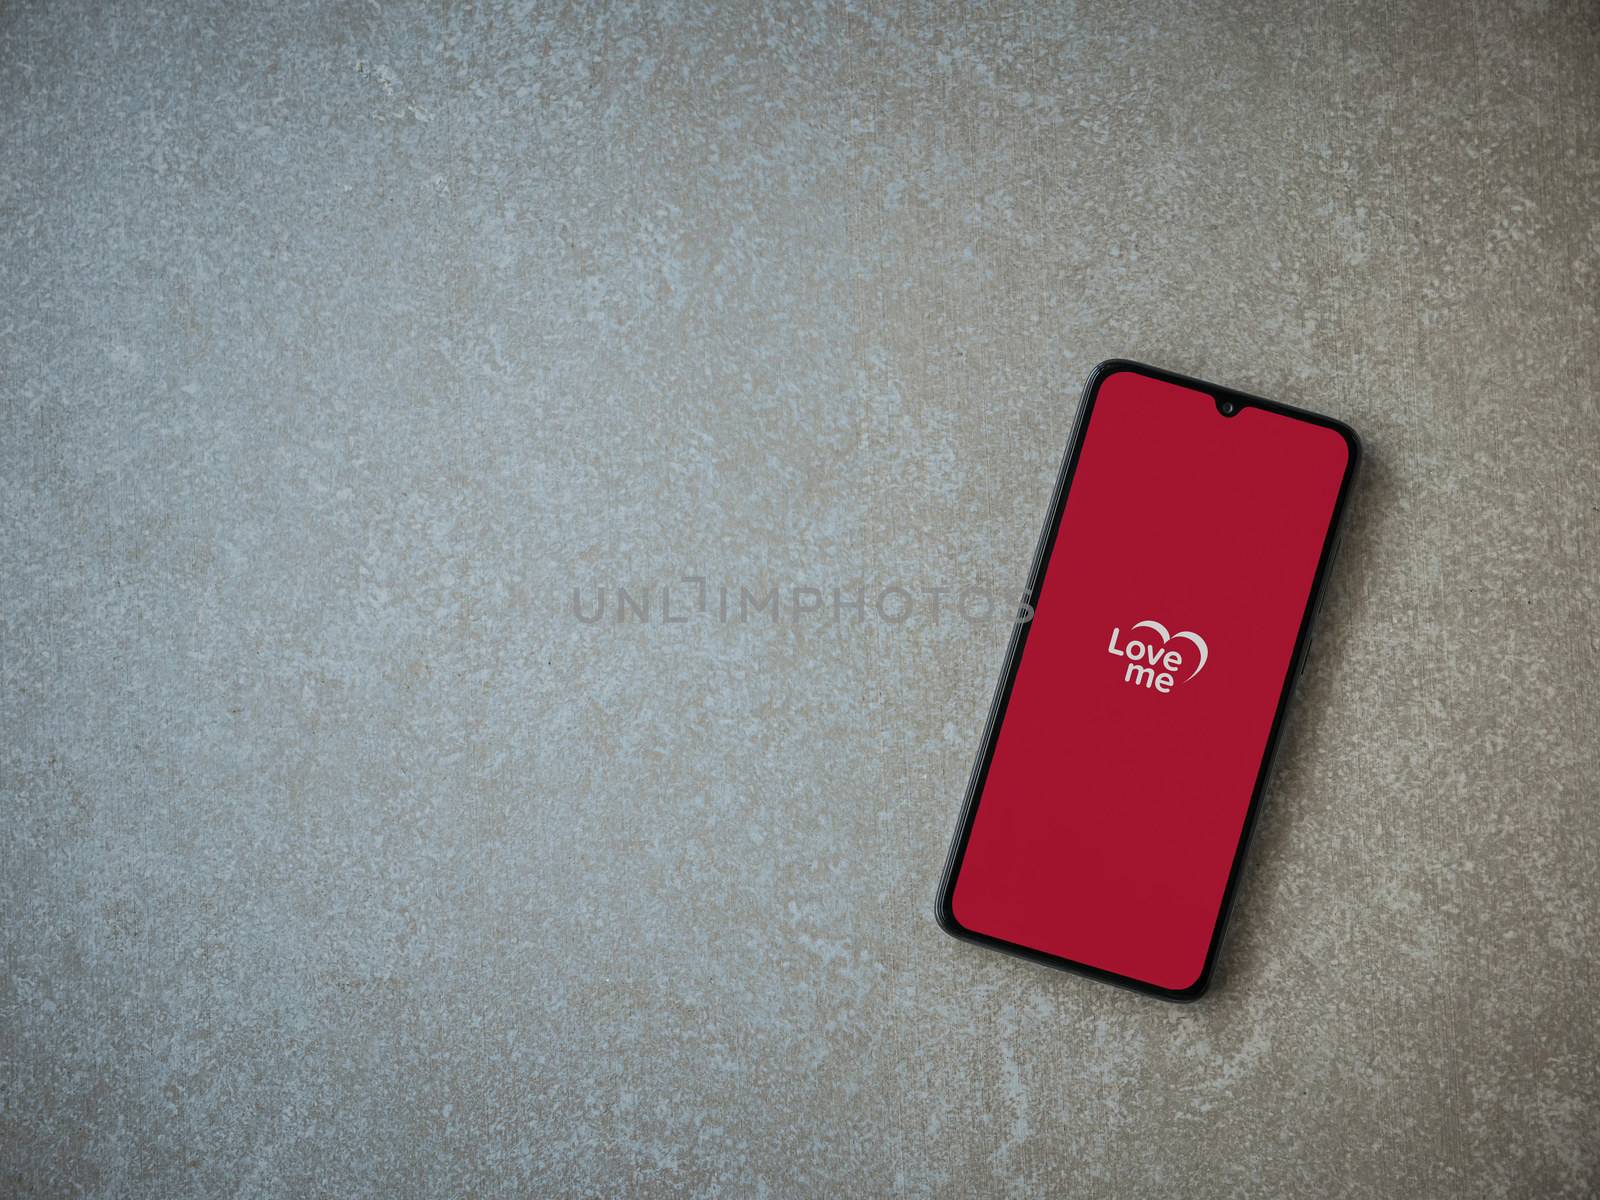 Lod, Israel - July 8, 2020: Loveme app launch screen with logo on the display of a black mobile smartphone on ceramic stone background. Top view flat lay with copy space.